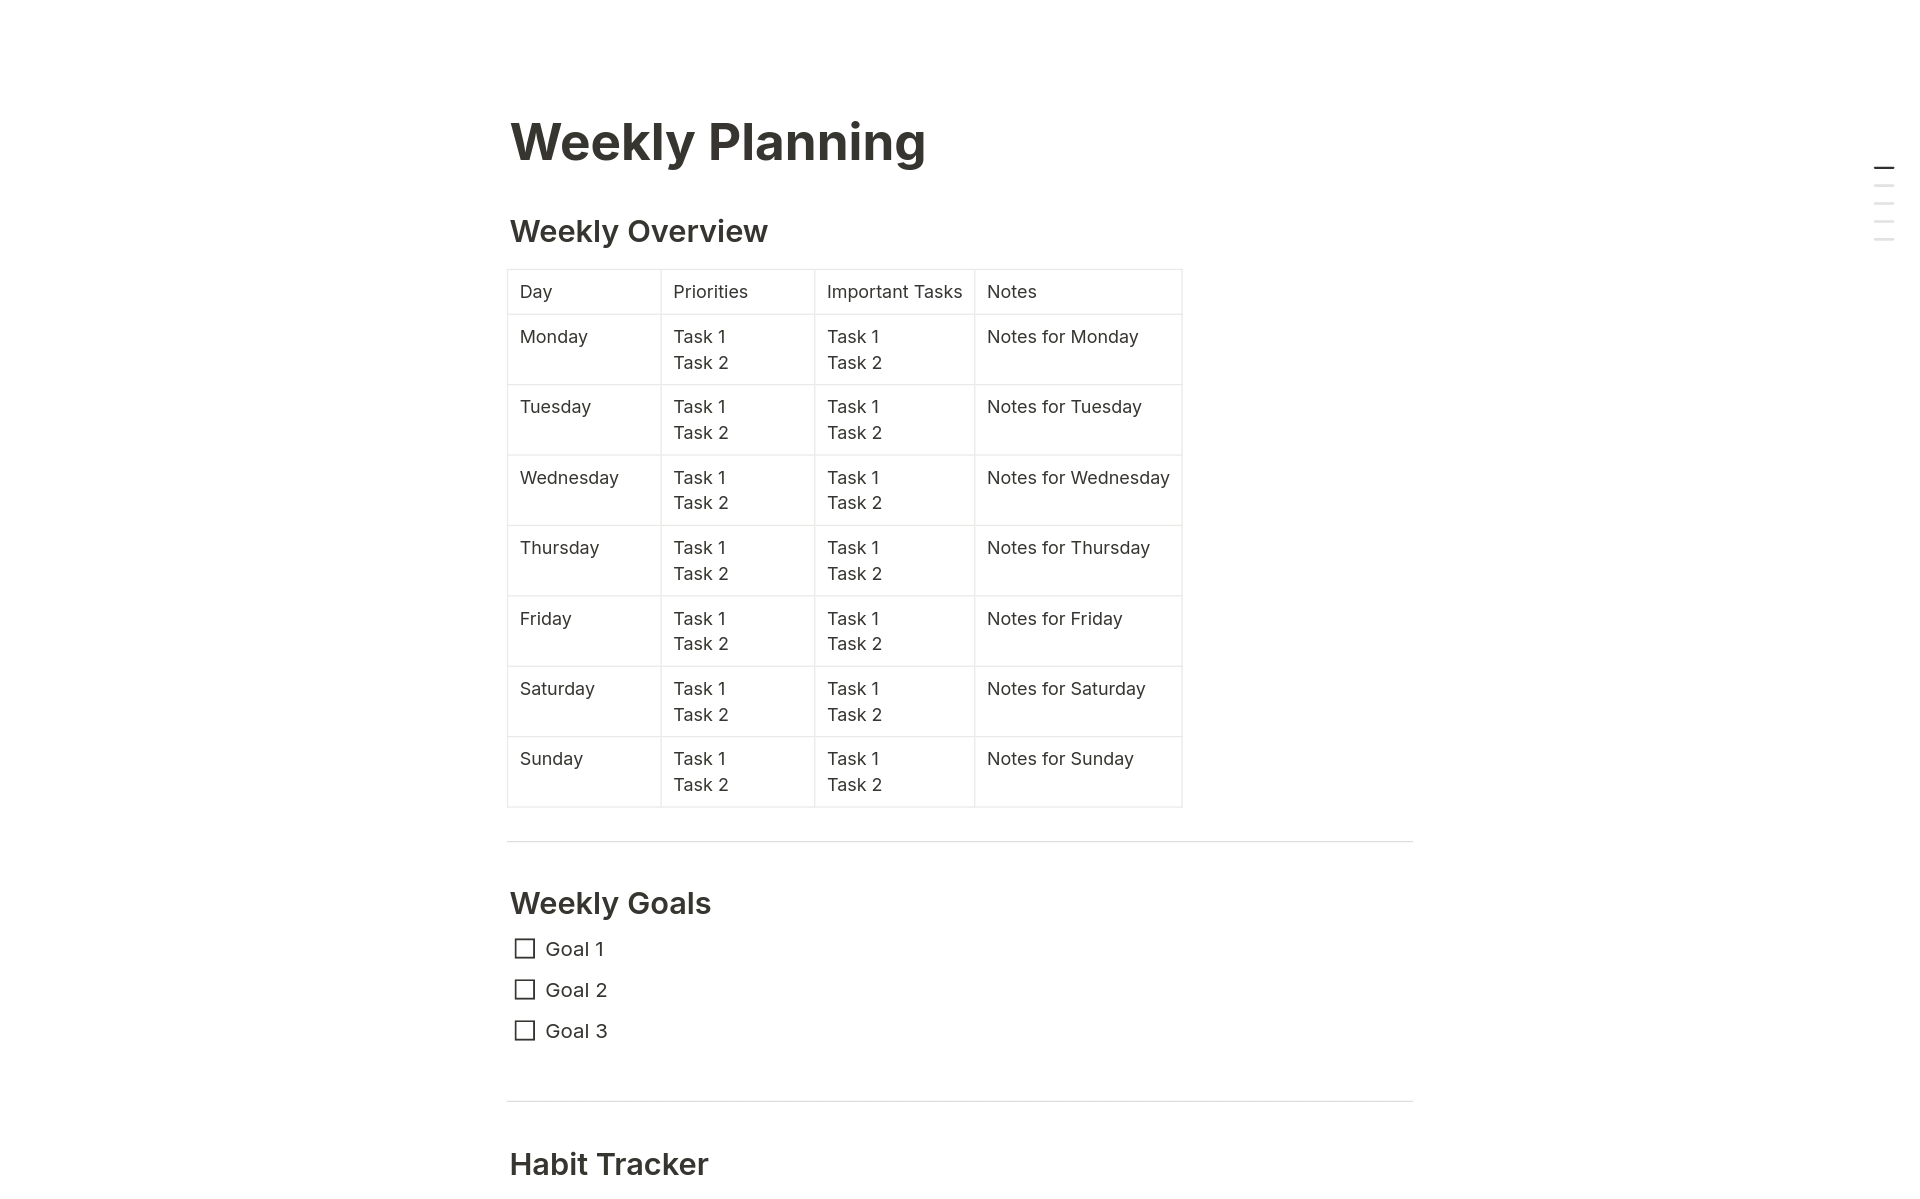 This template combines daily and weekly planners to help you stay organized and productive. Track your weekly goals, daily priorities, tasks, and reflections in one place. Easily duplicate templates for consistent planning and efficient time management.